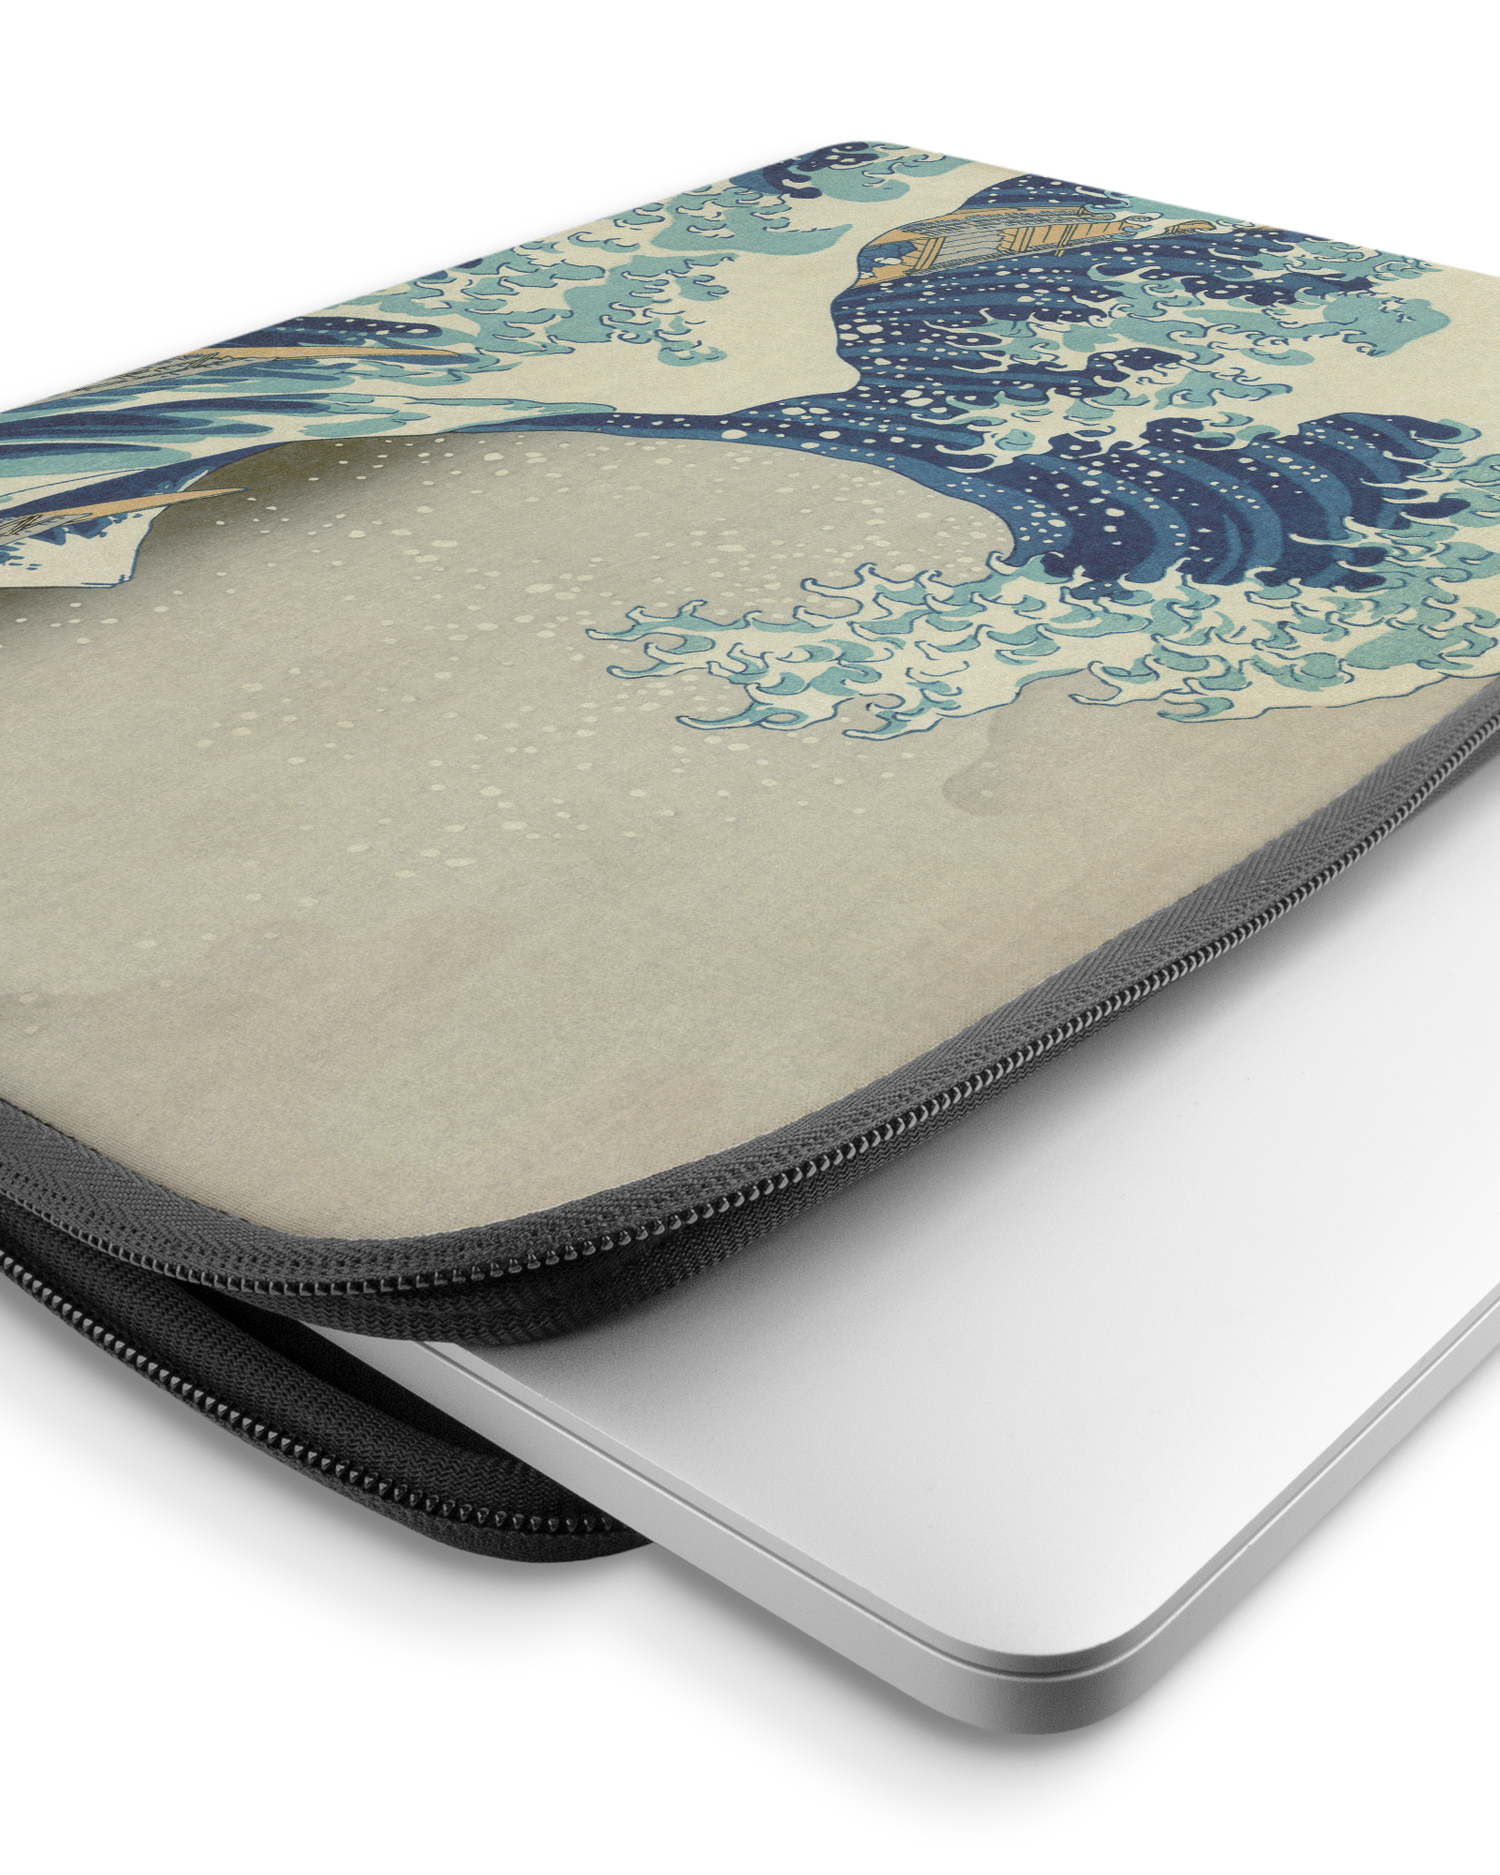 Great Wave Off Kanagawa By Hokusai Laptop Case 15-16 inch with device inside